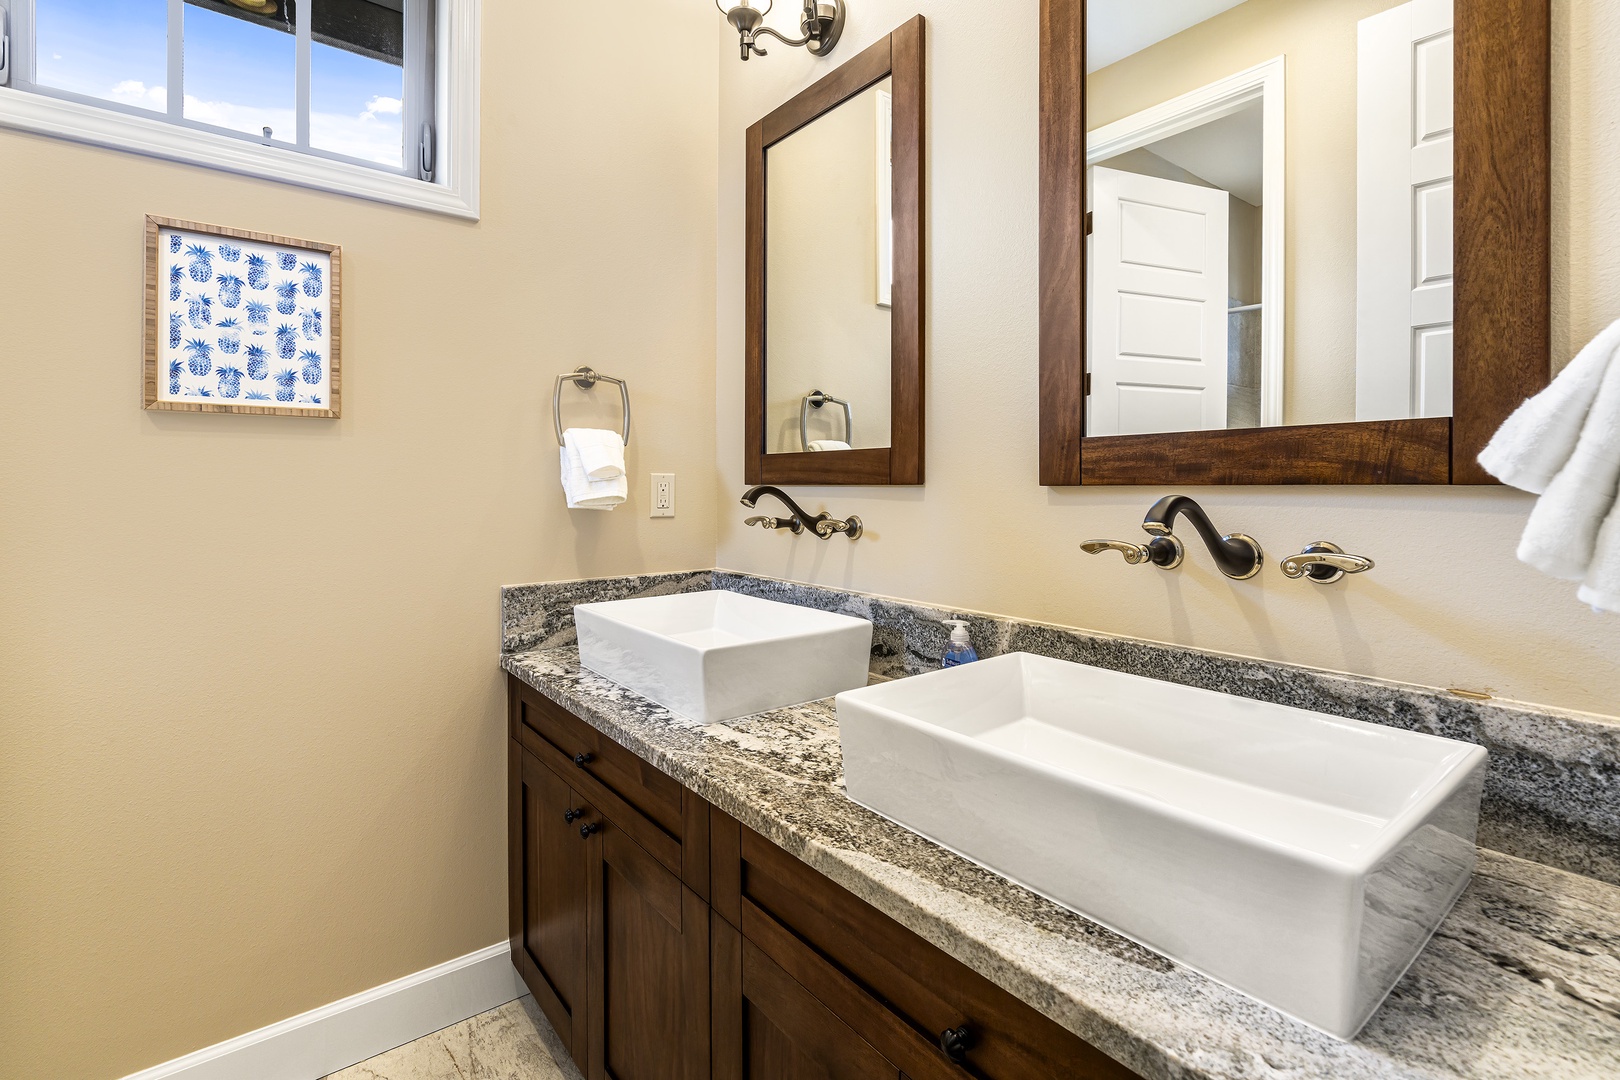 Kailua Kona Vacation Rentals, Holua Kai #9 - Guest bathroom upstairs also equipped with dual vanities